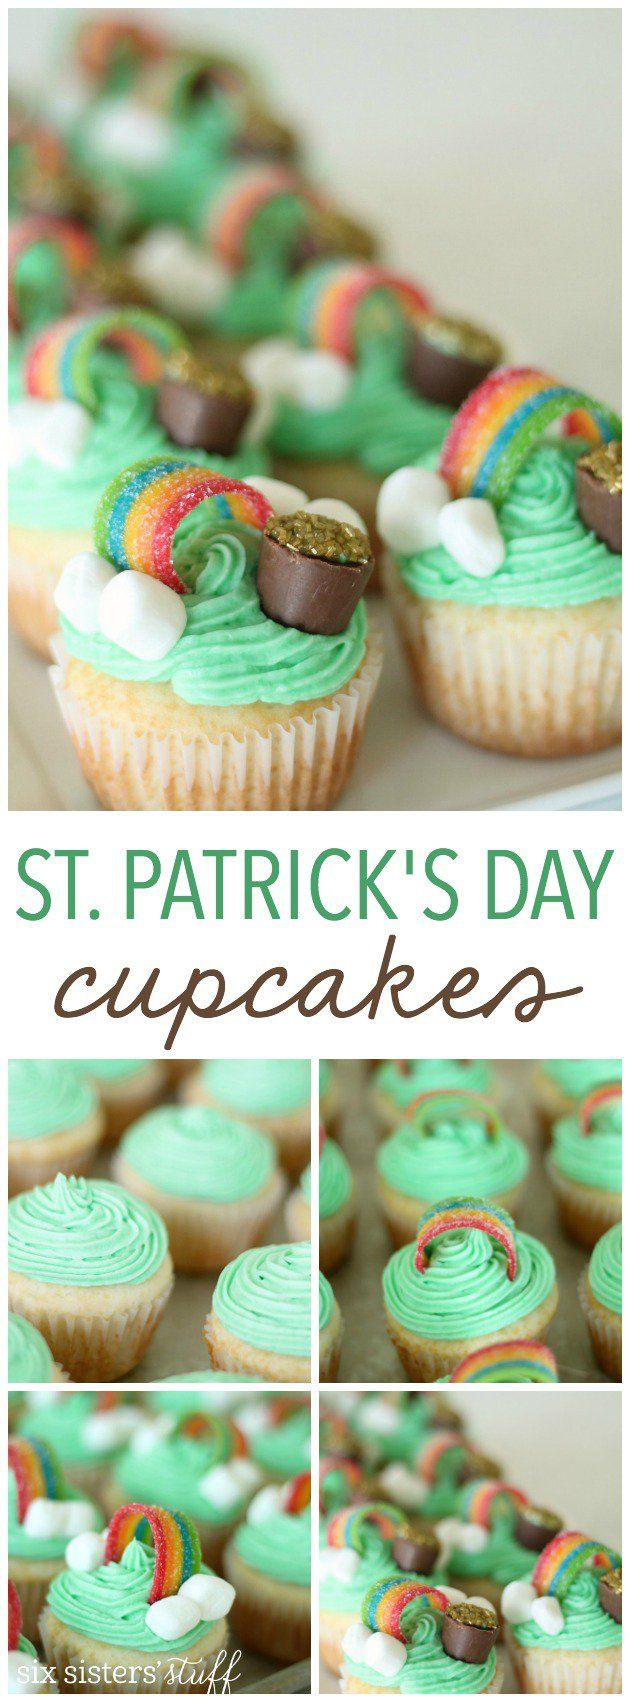 Saint Patrick Day Desserts
 St Patrick s Day Cupcakes from SixSistersStuff